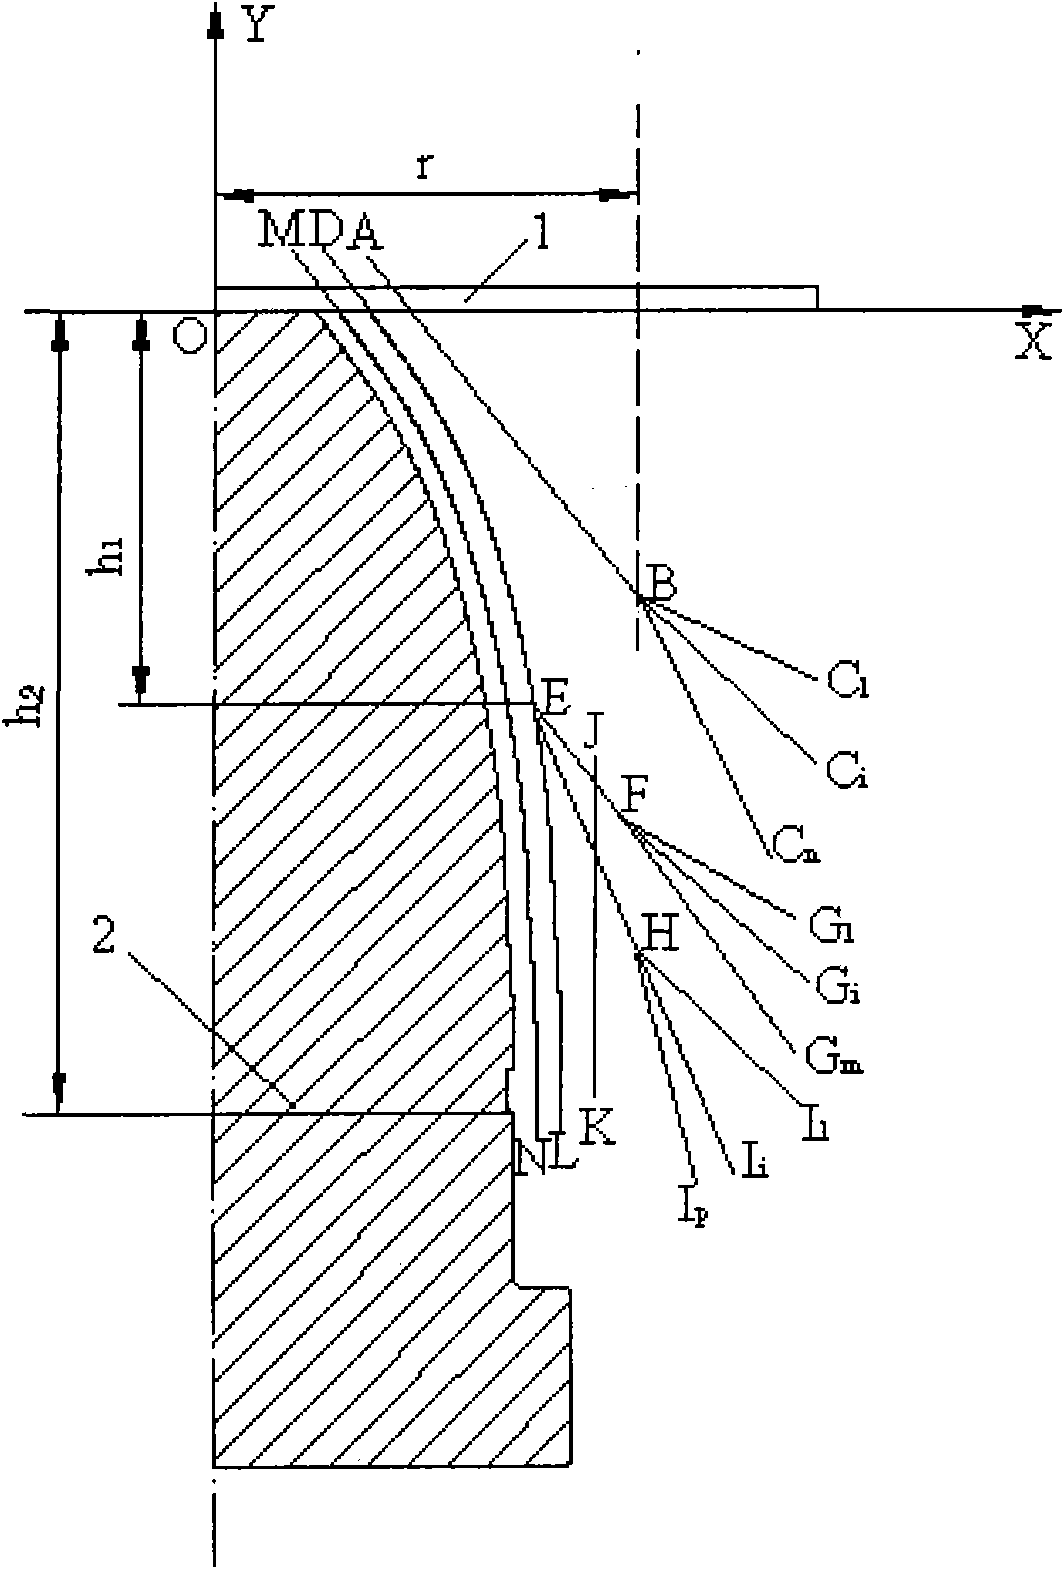 Method for forming large complex thin-wall shell with circumferential inner ribs